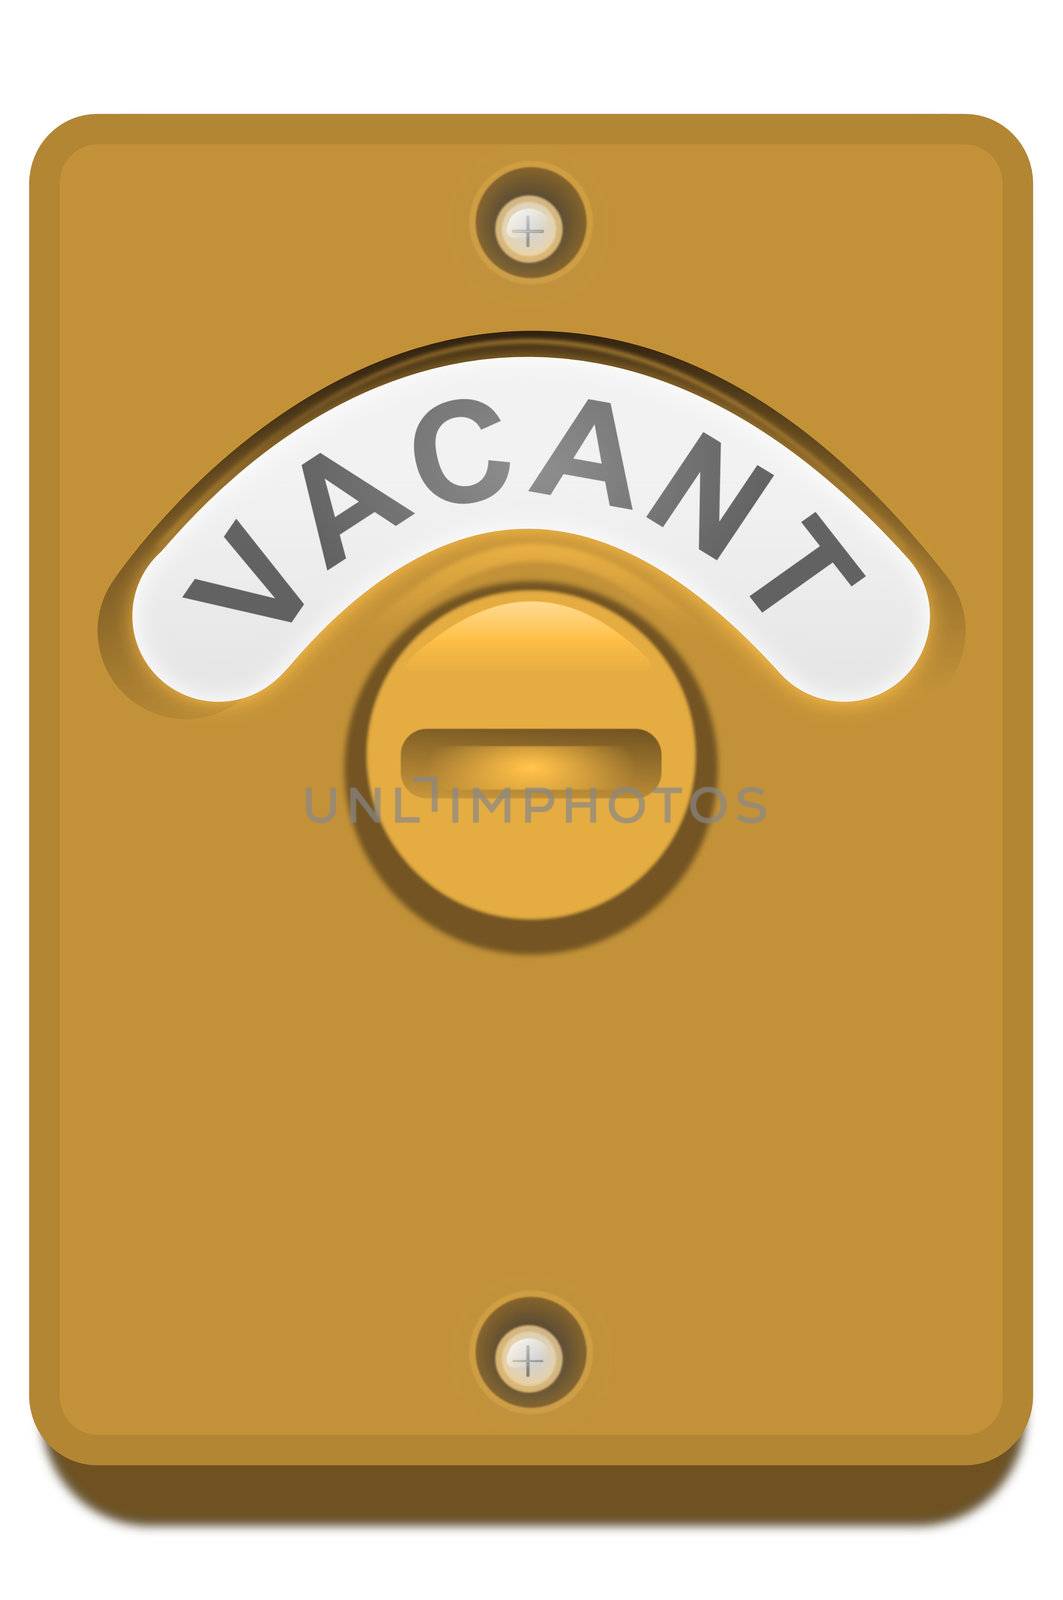 Illustration of a bronze toilet door lock with the 'vacant' position showing. White background.